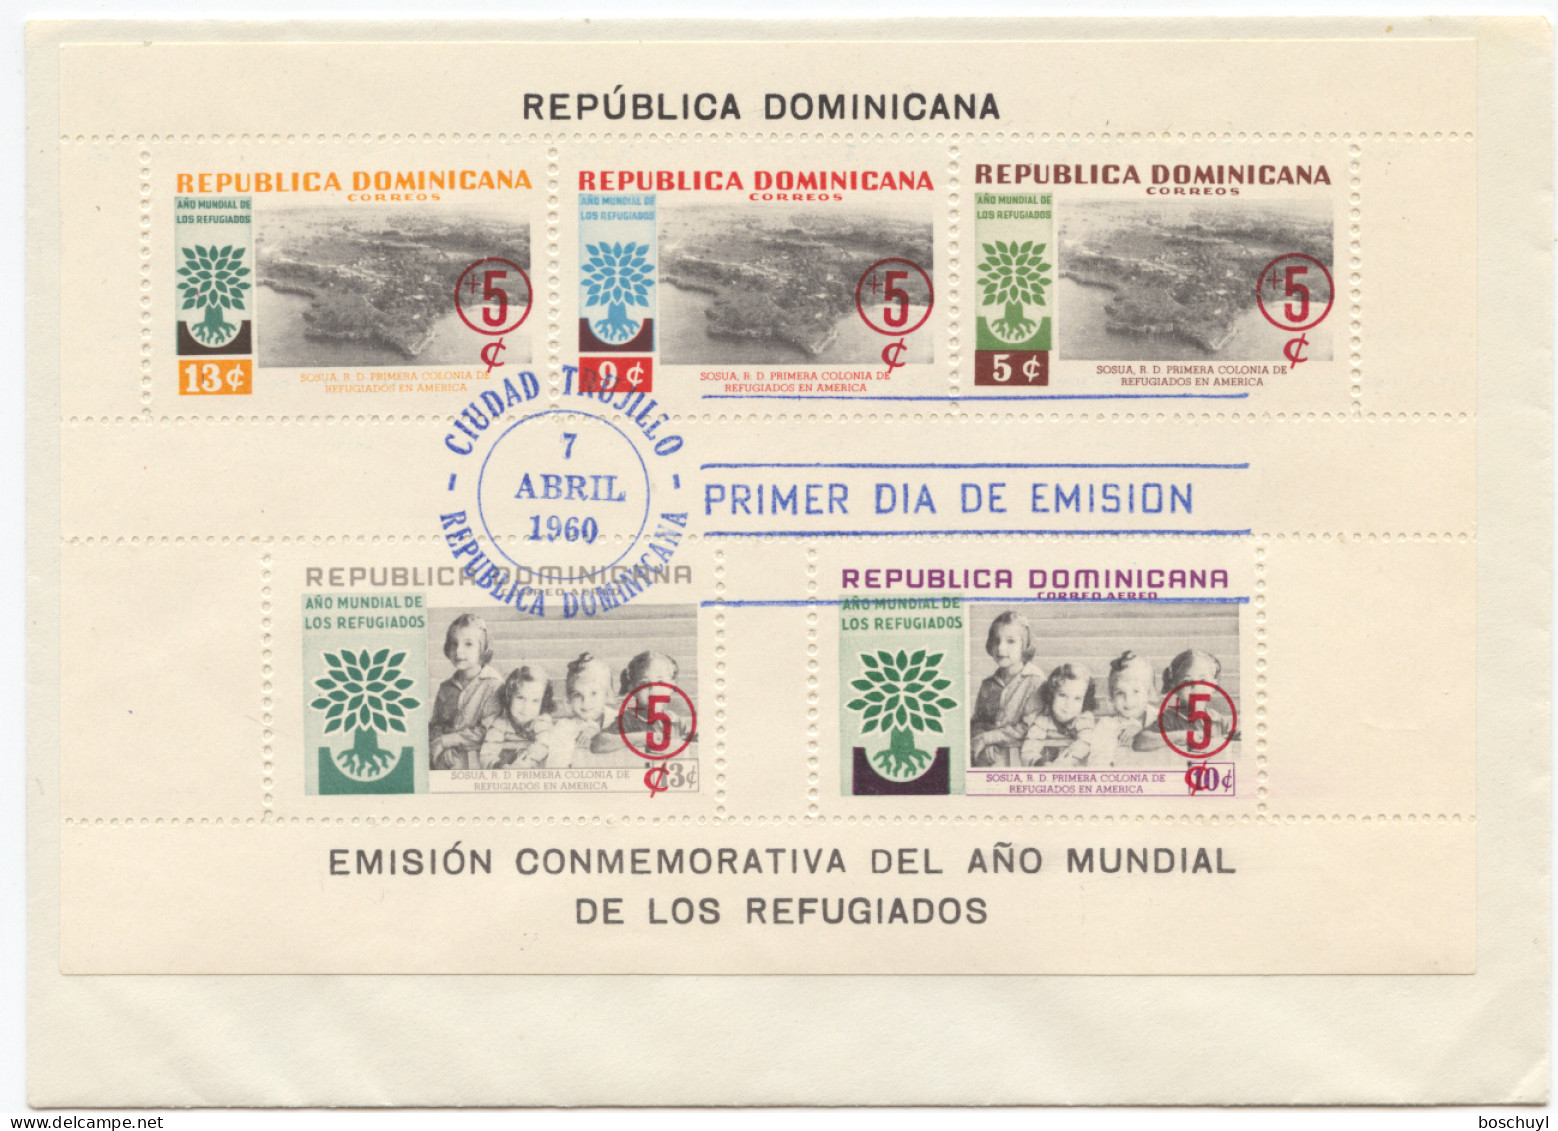 Dominican Republic, 1960, World Refugee Year, WRY, United Nations, Overprinted, On Cover, FD Cancelled, Michel Block 24A - Rifugiati